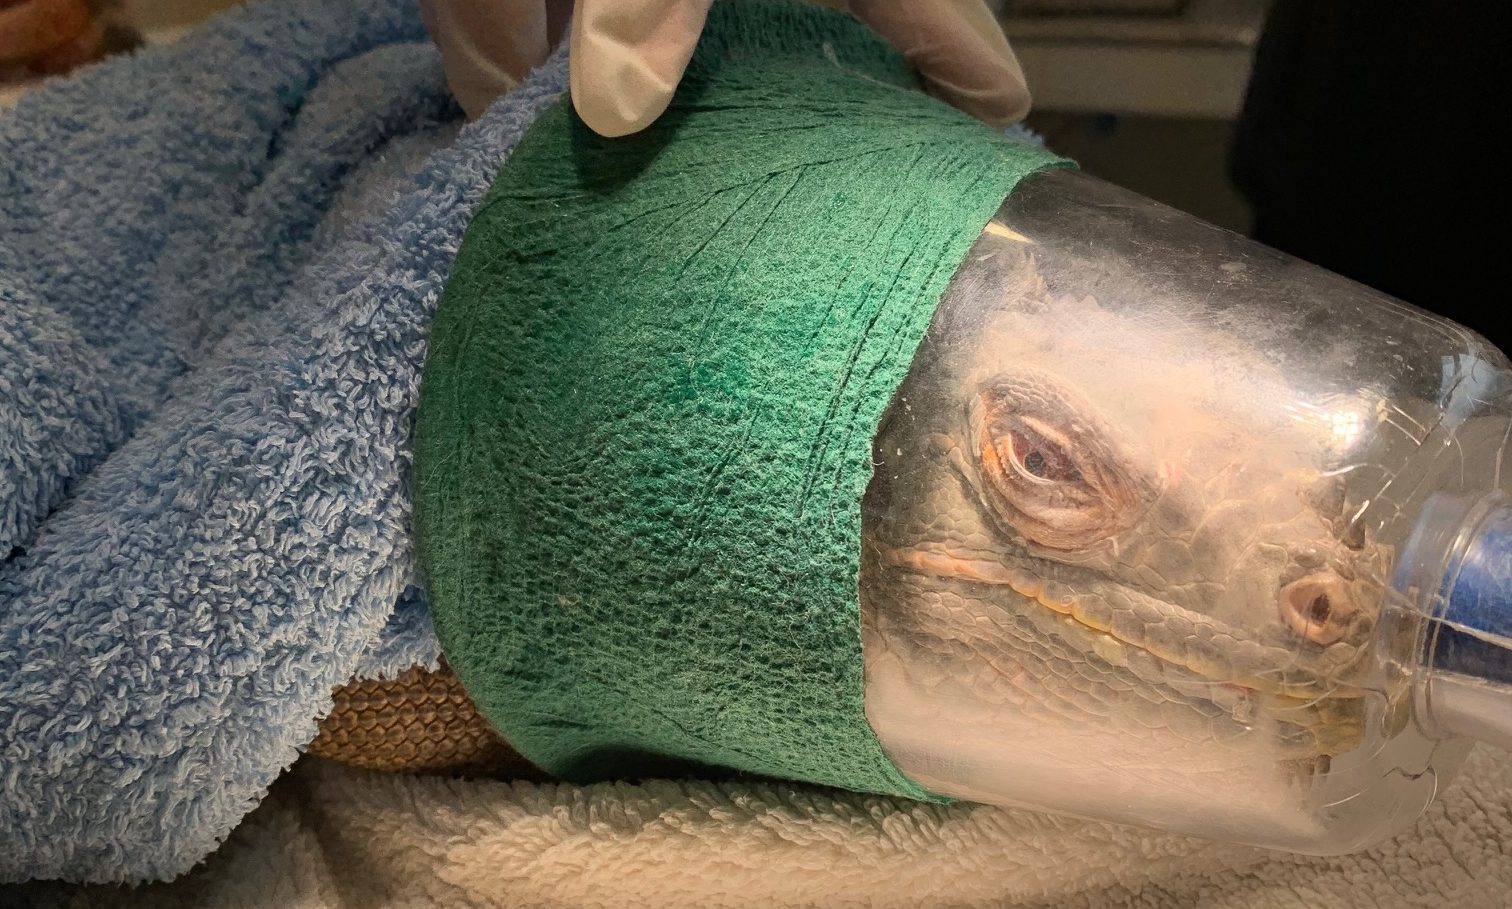 One of the iguanas receiving treatment after the brawl.